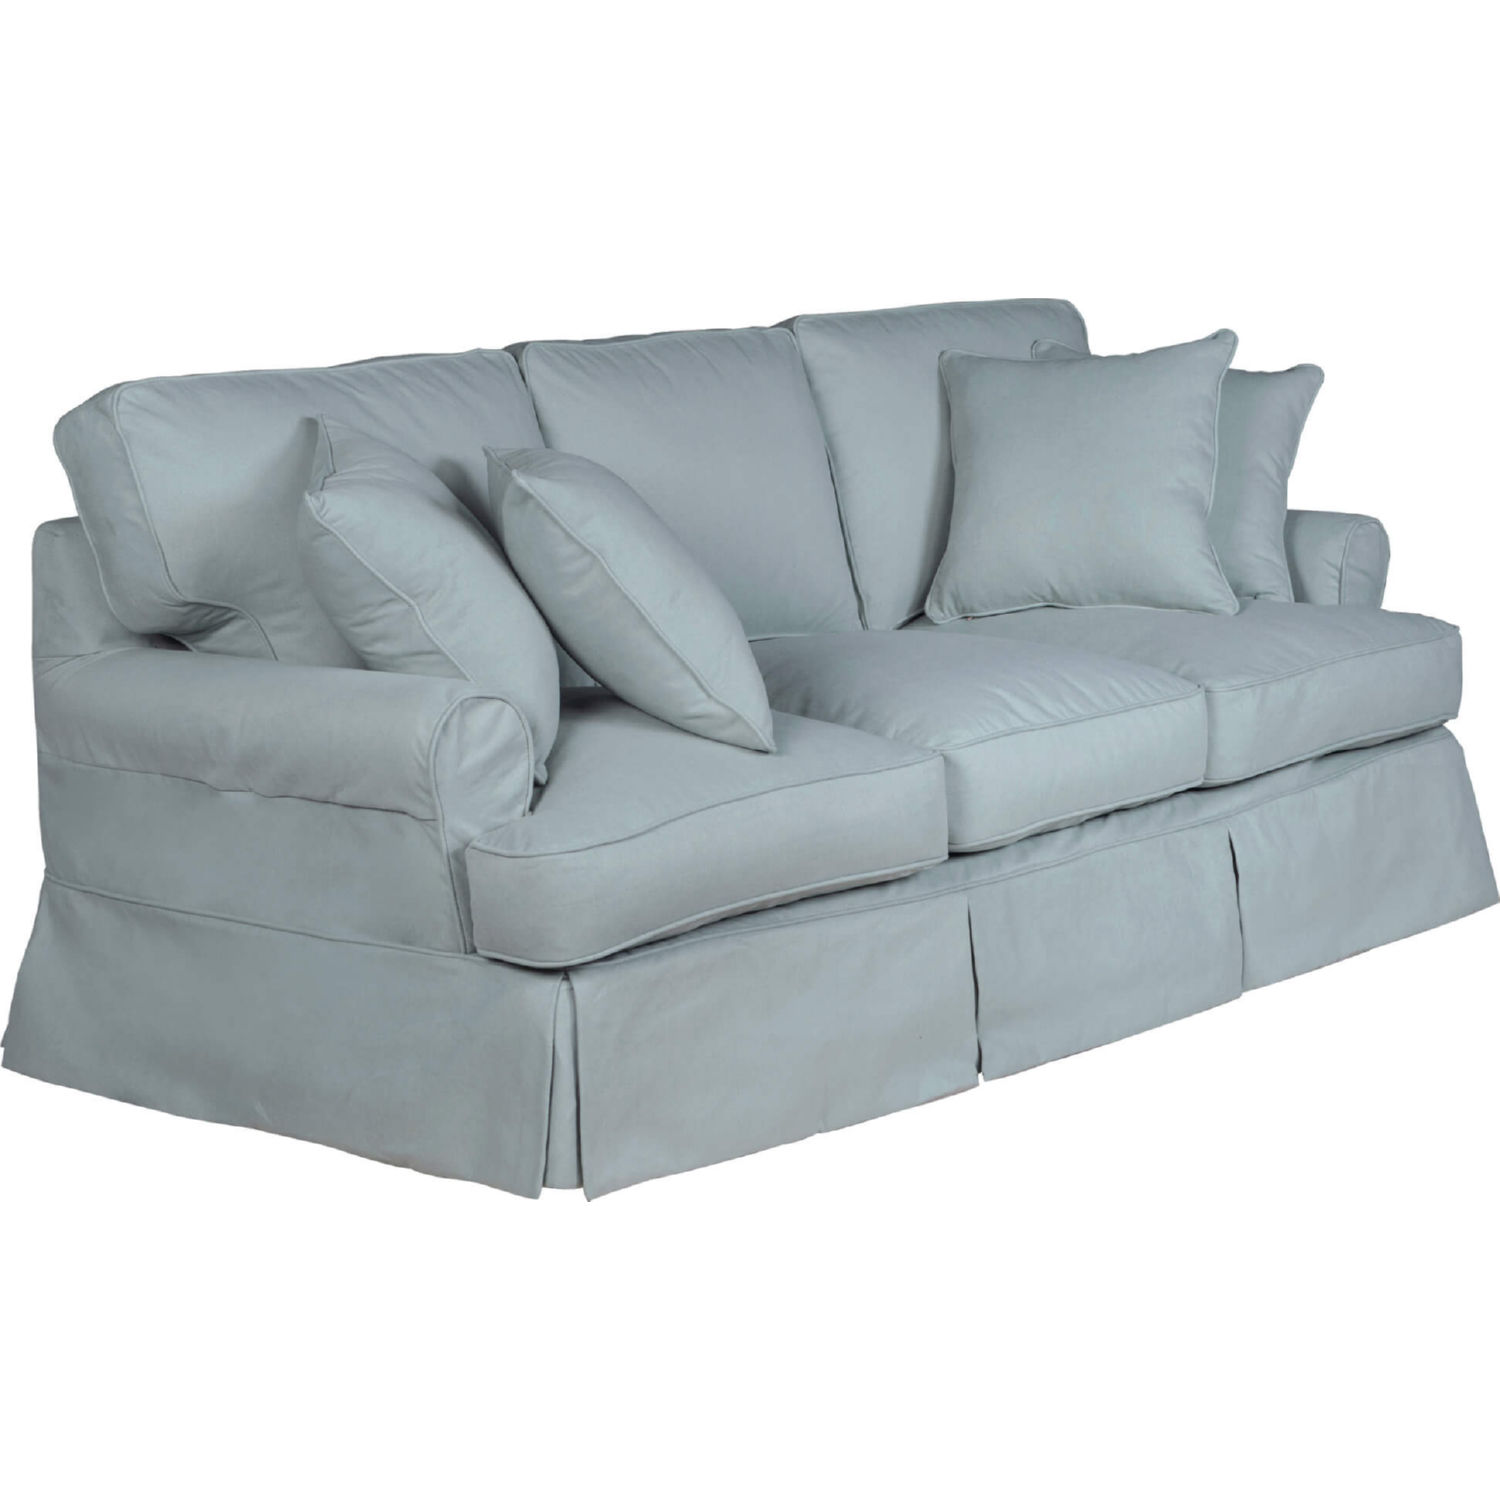 Sunset SU-117600SC-391043 Horizon Replacement Slipcover Only for T-Cushion  Sofa in Ocean Blue Performance Fabric